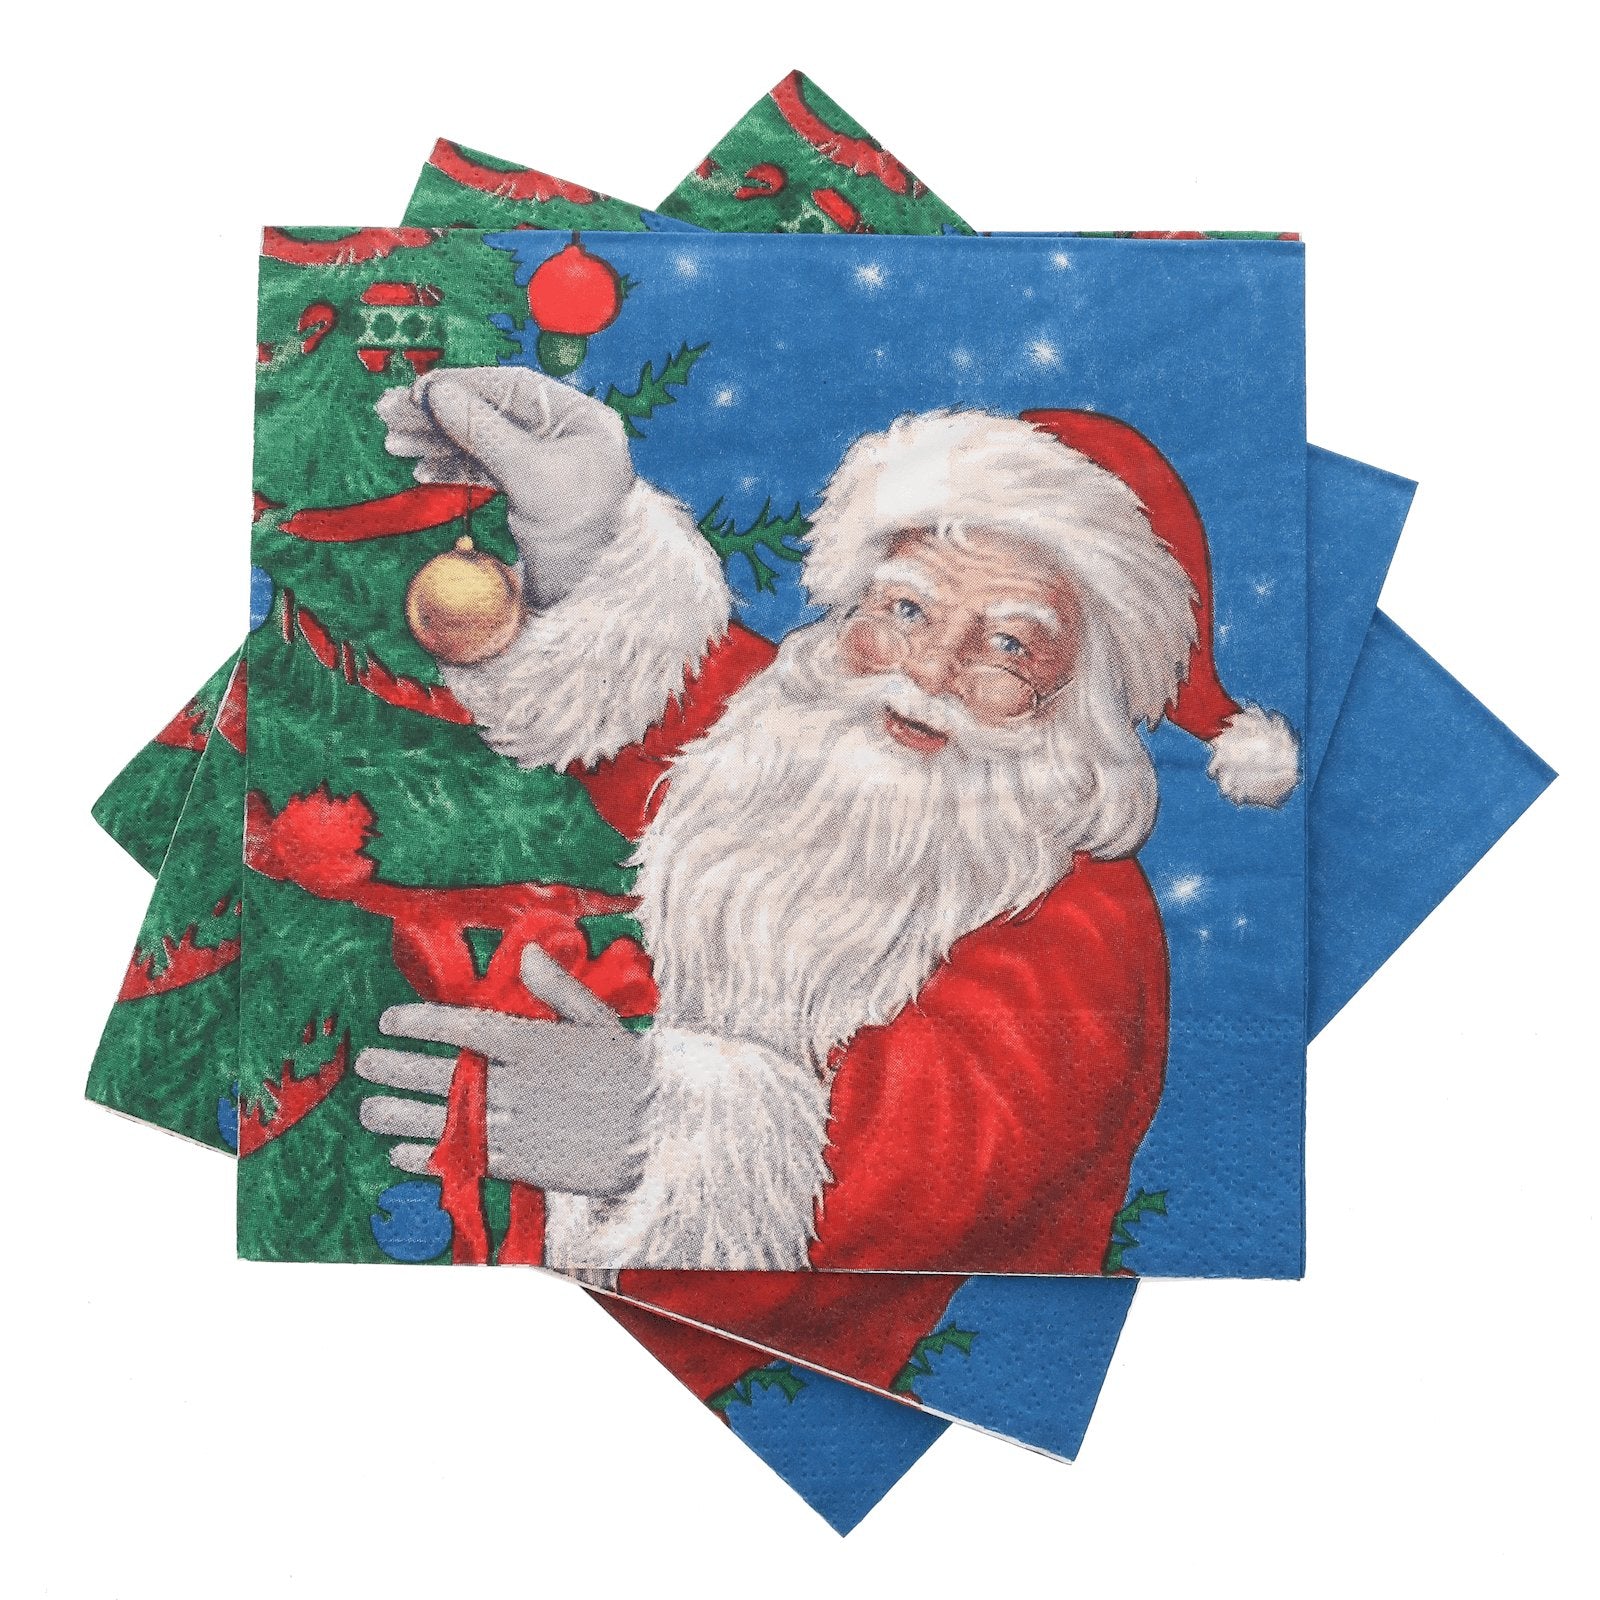 3 napkins featuring vibrant santa design piled on top of each other